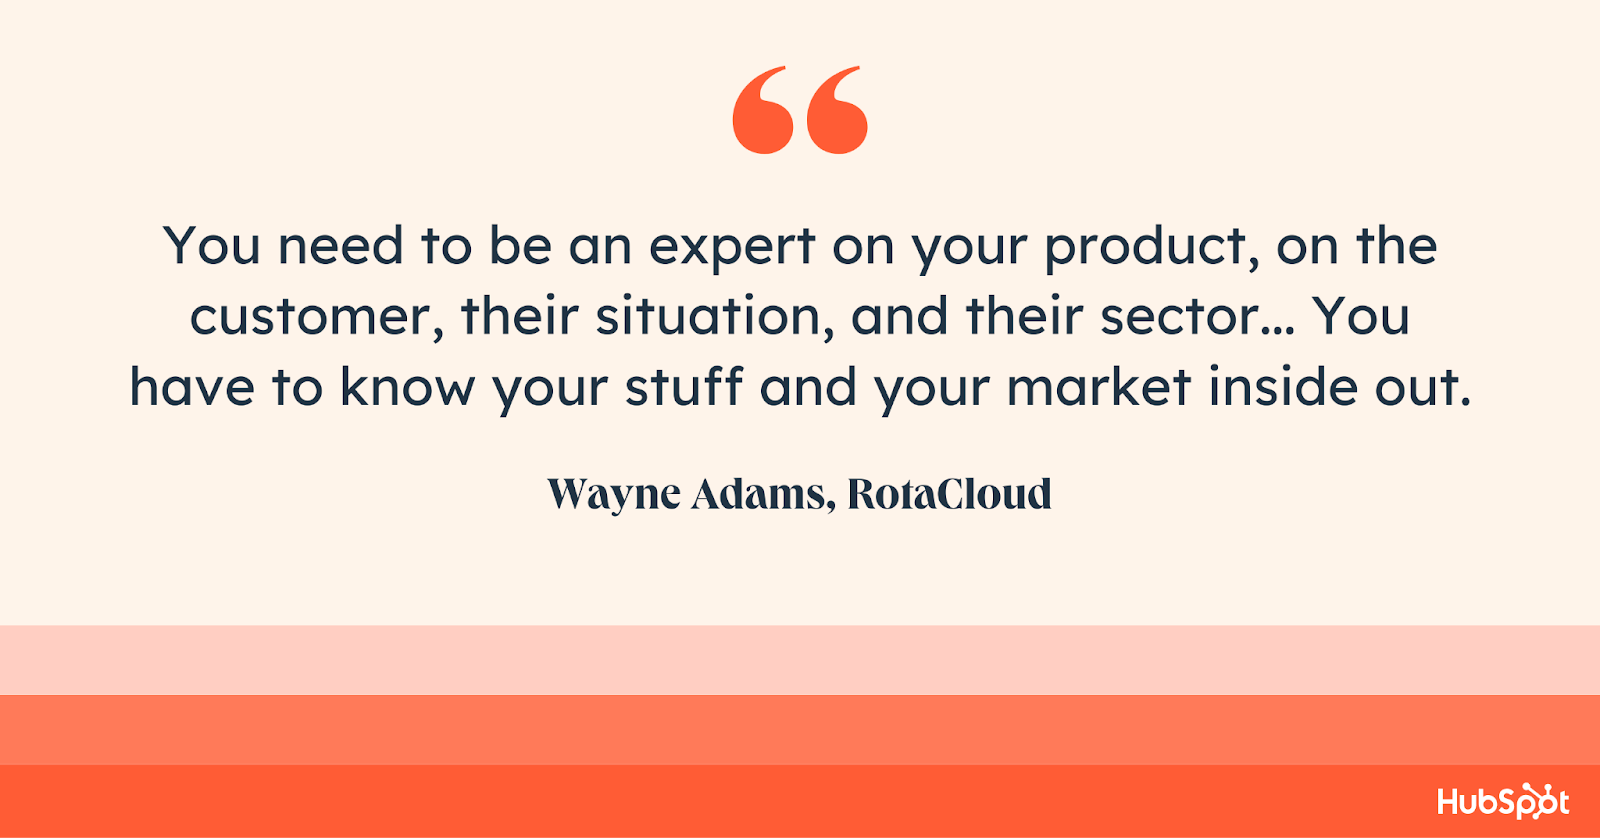 Wayne Adams, RotaCloud. You need to be an expert on your product, on the customer, their situation, and their sector... You have to know your stuff and your market inside out.